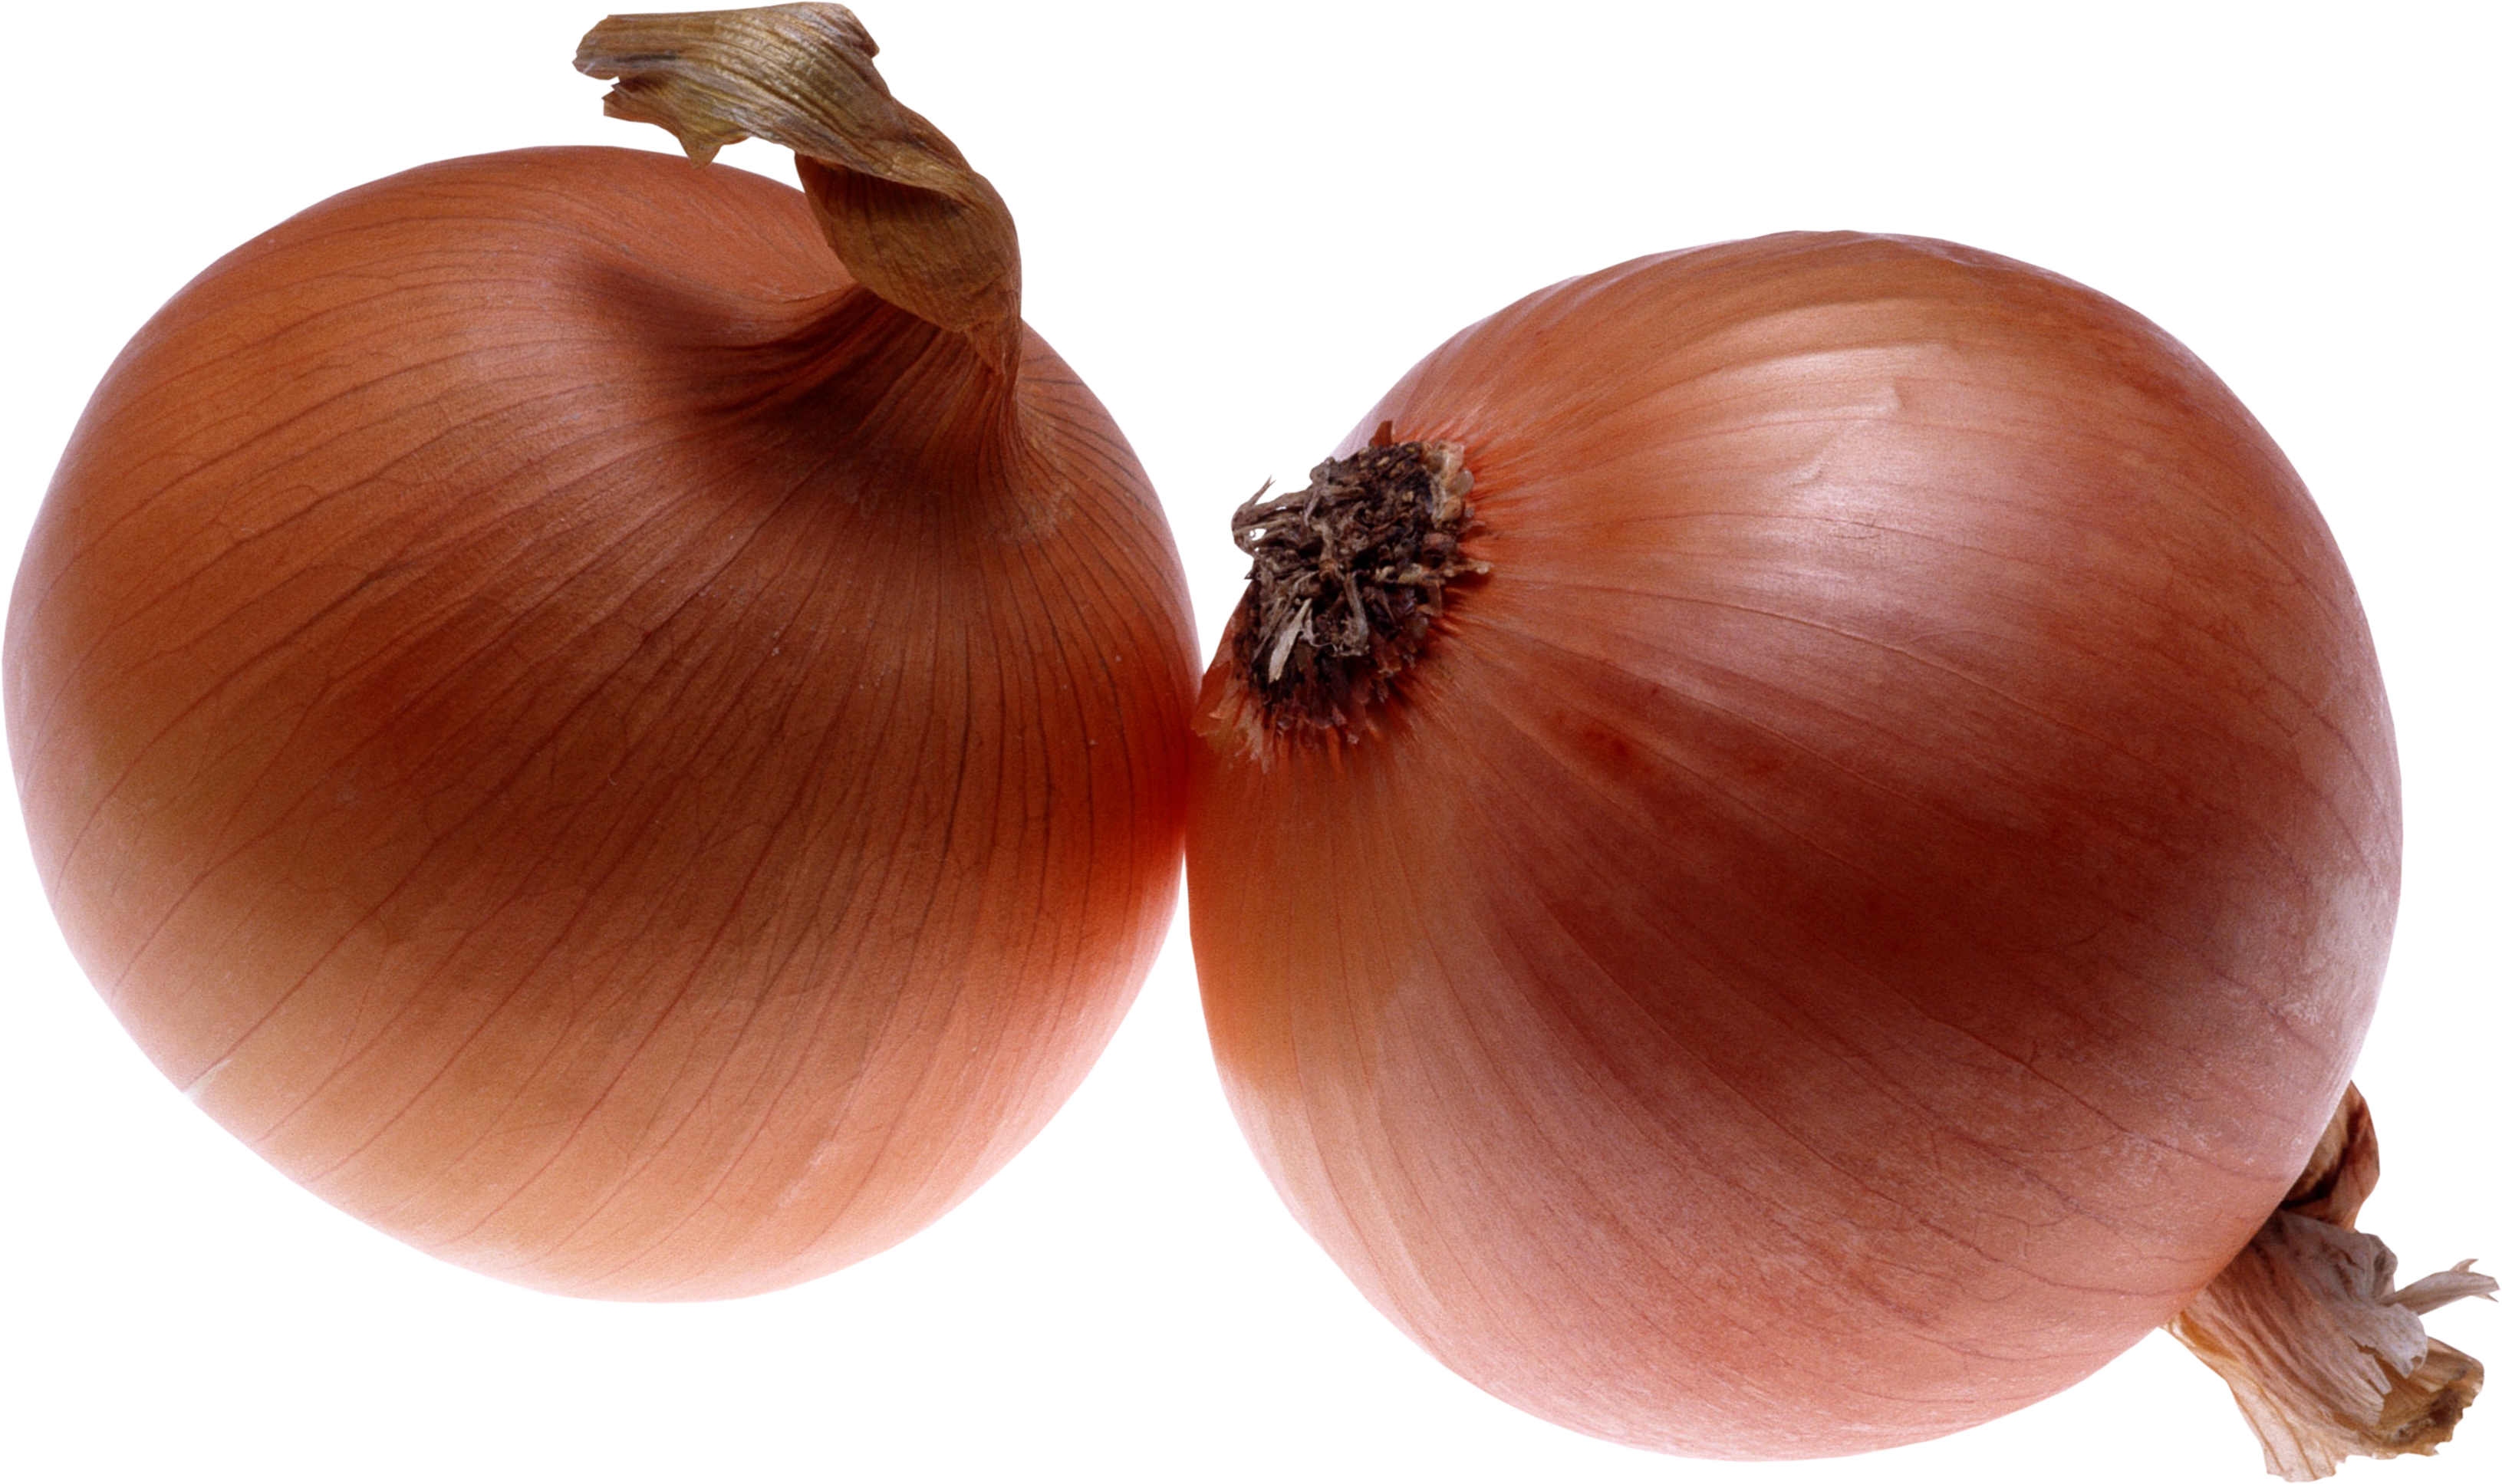 Onion PNG - 27711